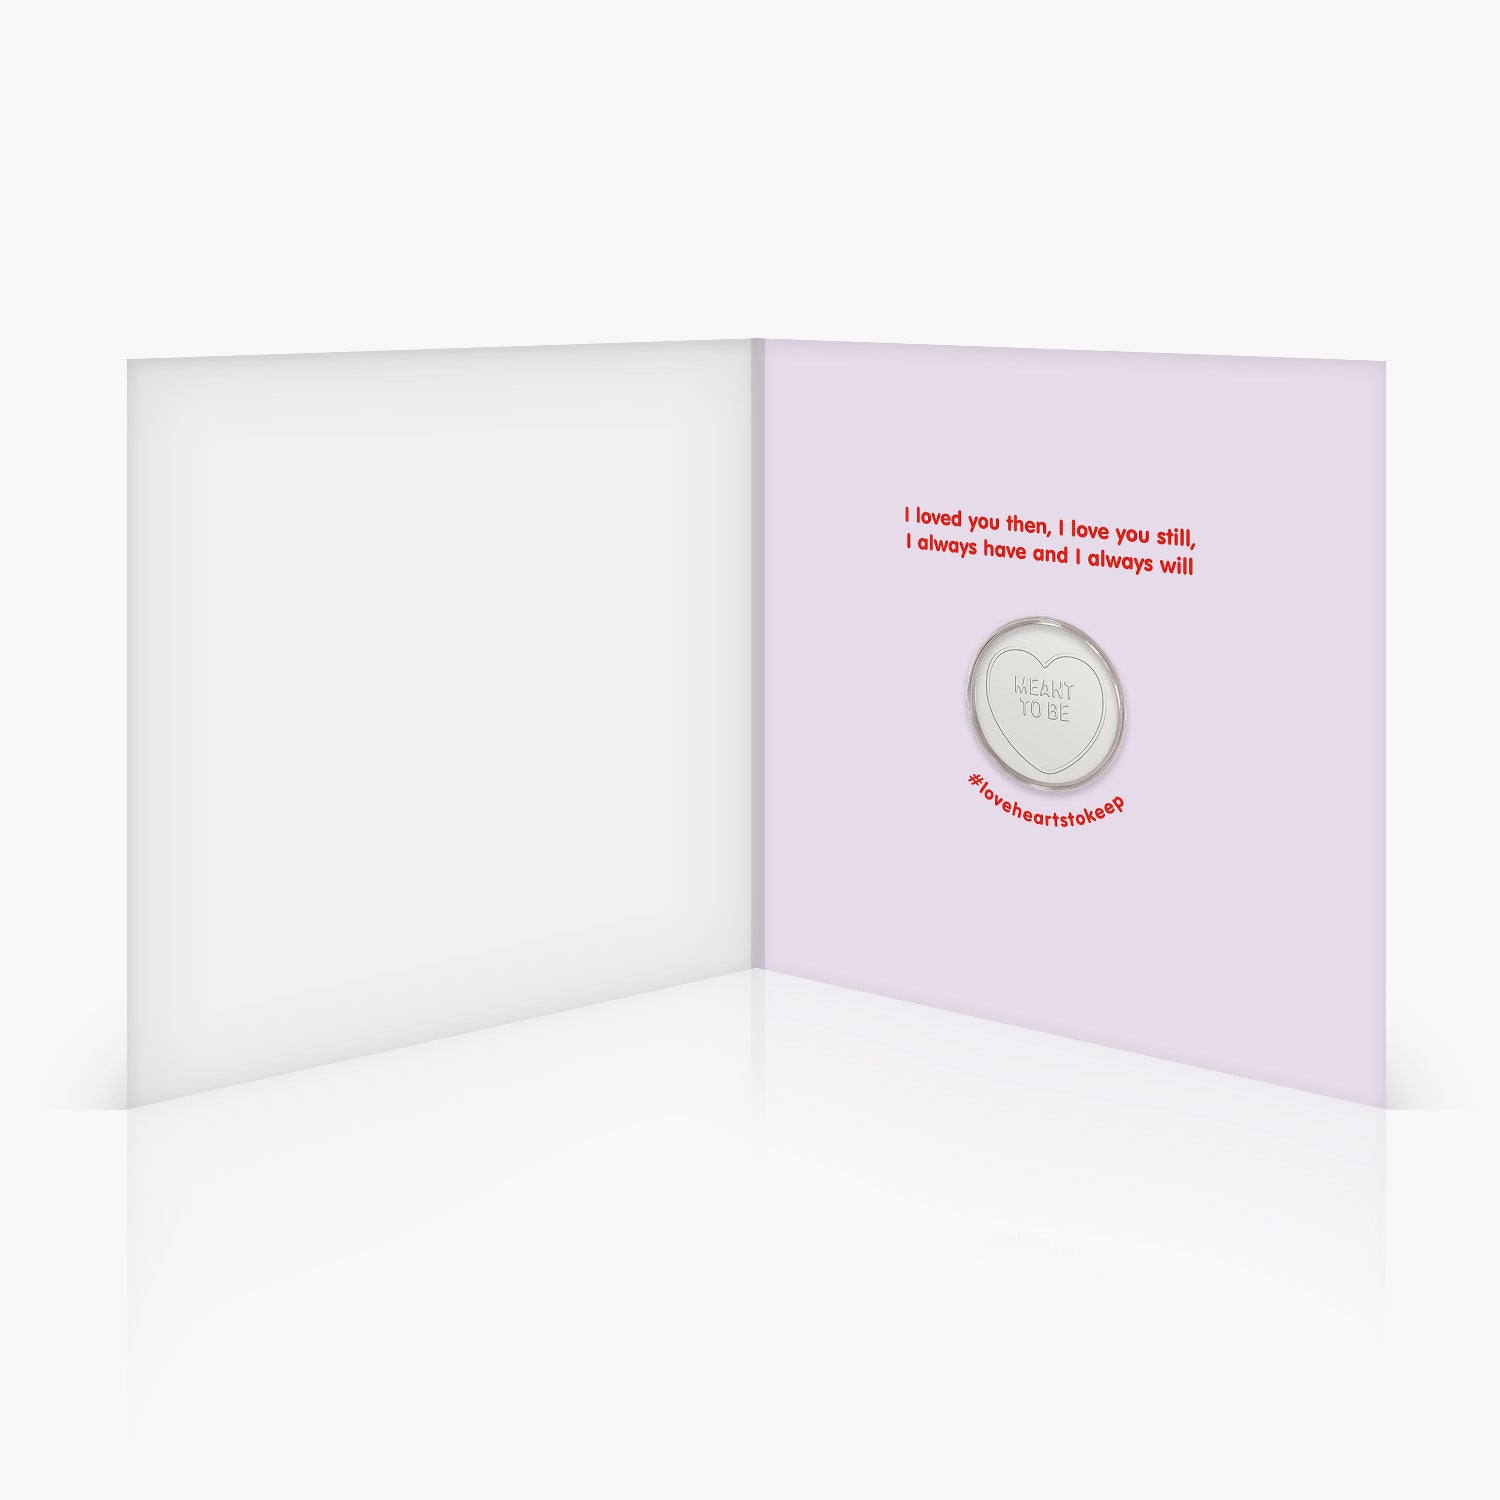 Meant To Be Love Heart Card